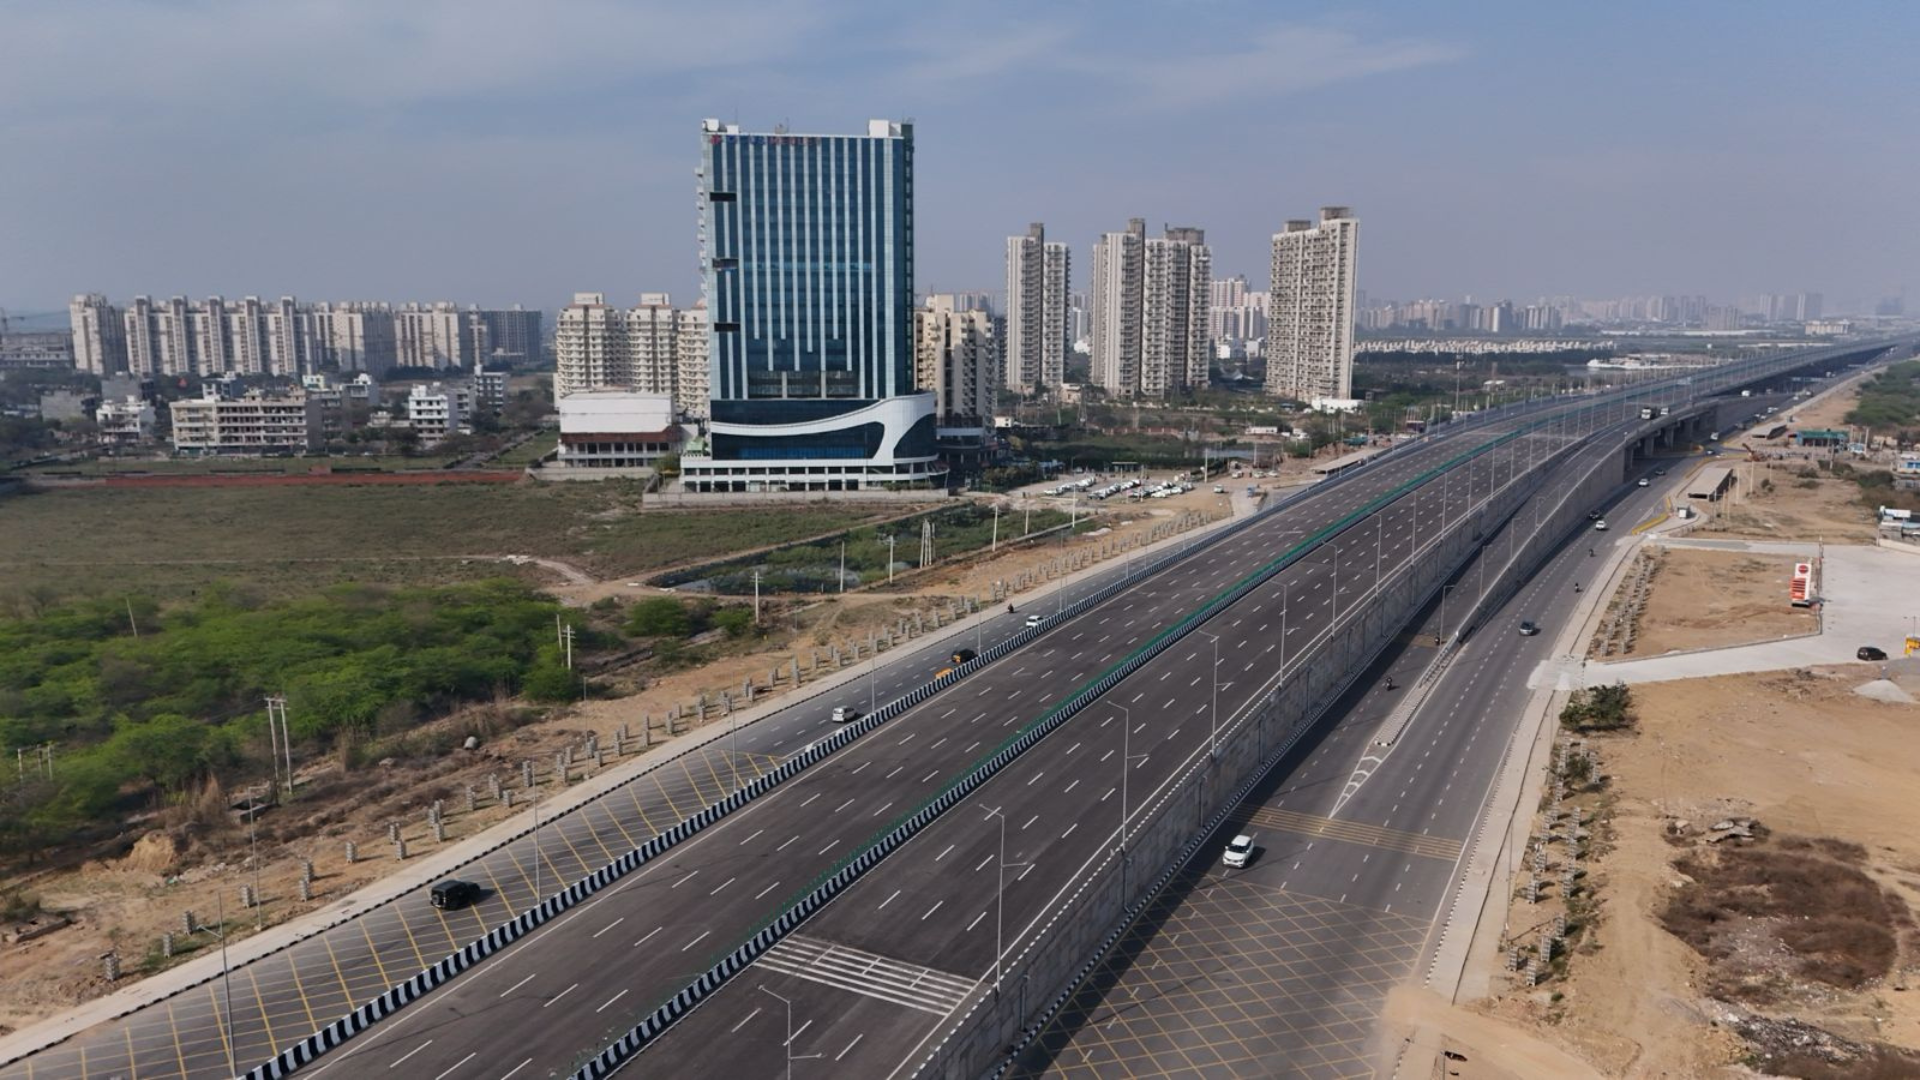 JICA signs Rs 2,800 cr loan pact for Chennai peripheral ring road project |  India News - Business Standard